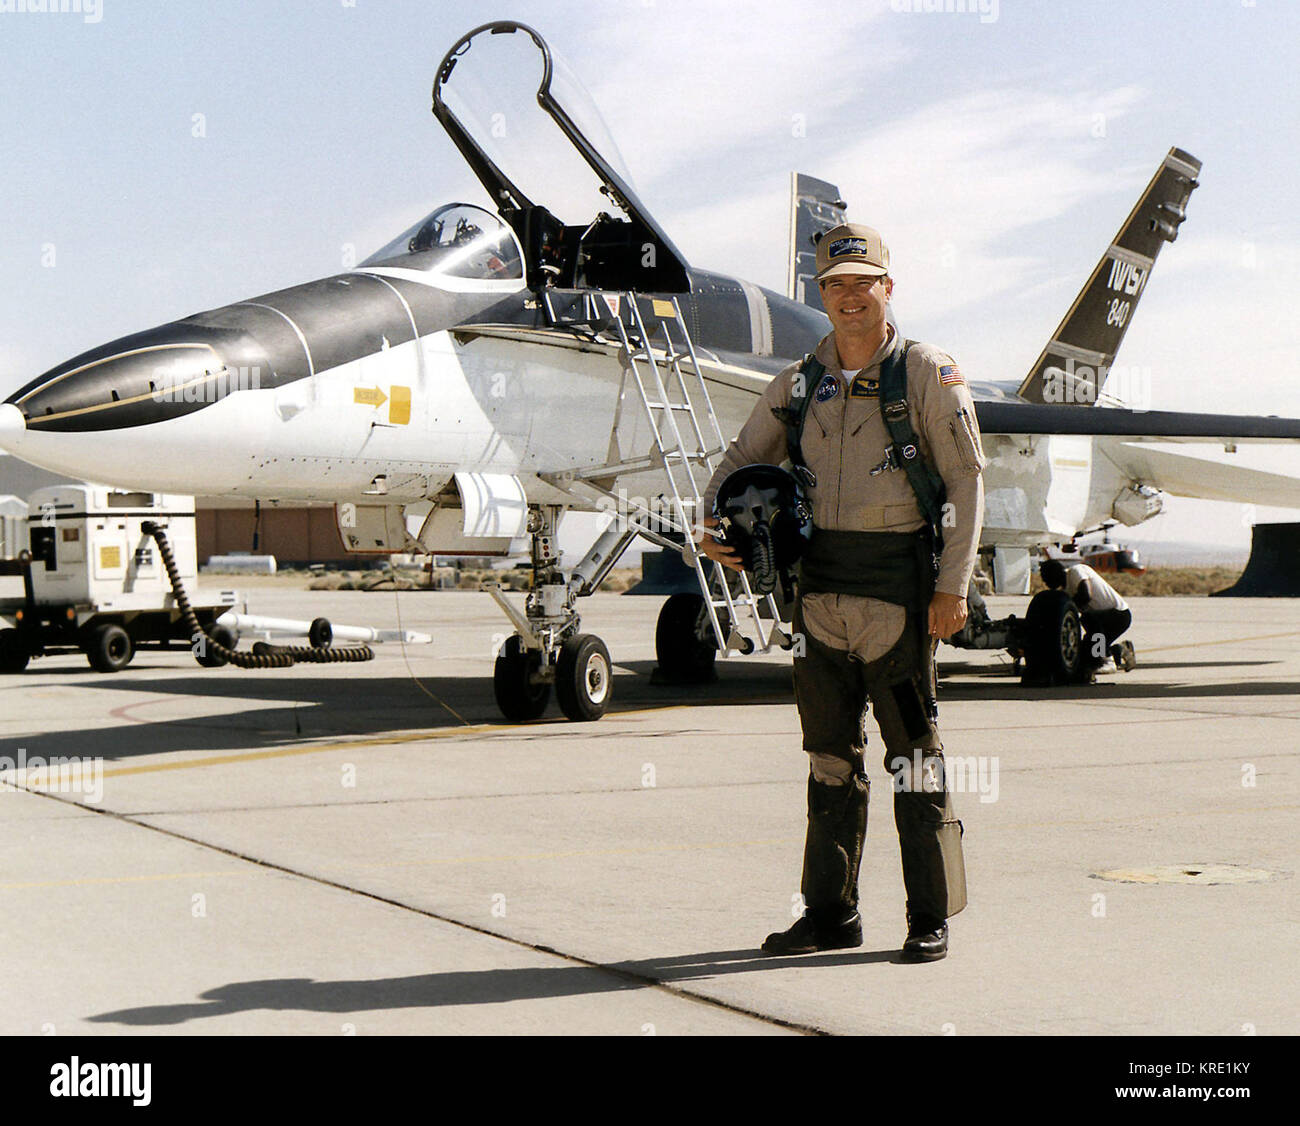 EC94-43599-1 Dana D. Purifoy is an aerospace research pilot at NASA's Dryden Flight Research Center, Edwards, California. He joined NASA in August 1994. Purifoy is a former Air Force test pilot who served as a project pilot in the joint NASA/Air Force X-29 Forward Swept Wing research program conducted at Dryden from 1984 to 1991. 1996 NASA Photo / & F-18 HARV Project Description  NASA Identifier: 310189main EC94-43599-1 Dana Purifoy with F-18 High Alpha Research Vehicle (EC94-43599-1) Stock Photo